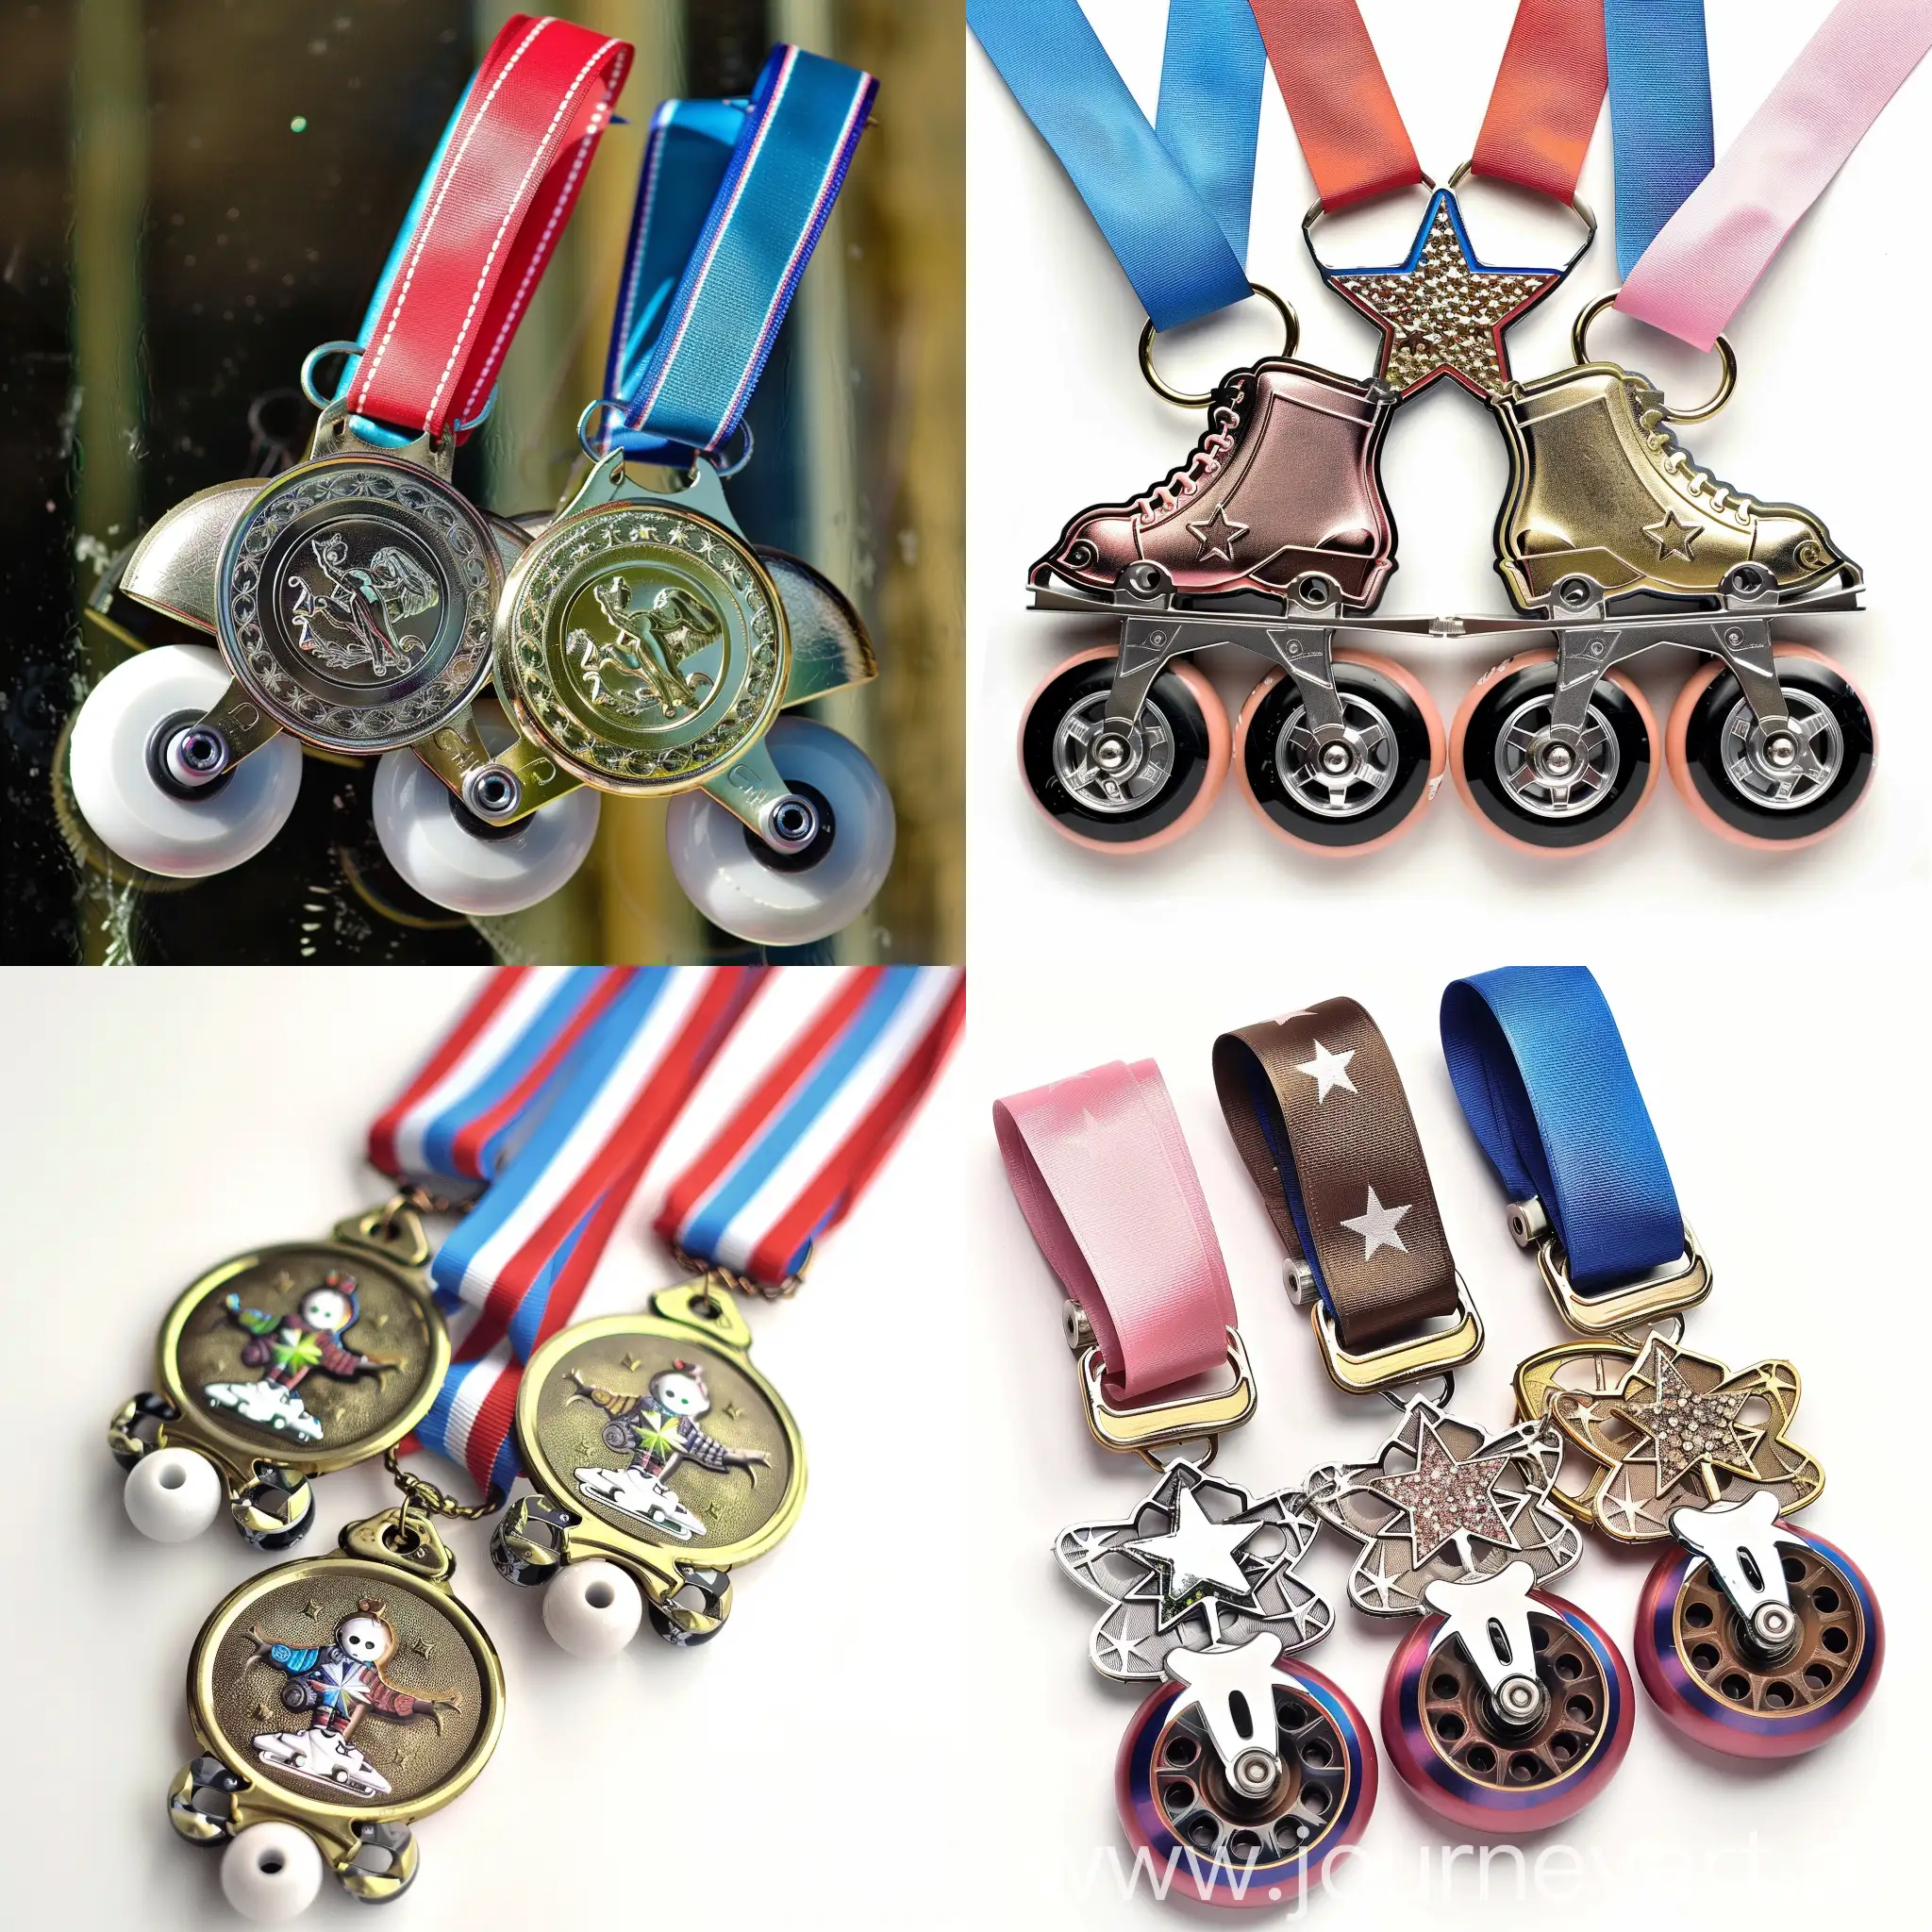 Kids-Roller-Skating-Medals-Victorious-Young-Skaters-with-Awards